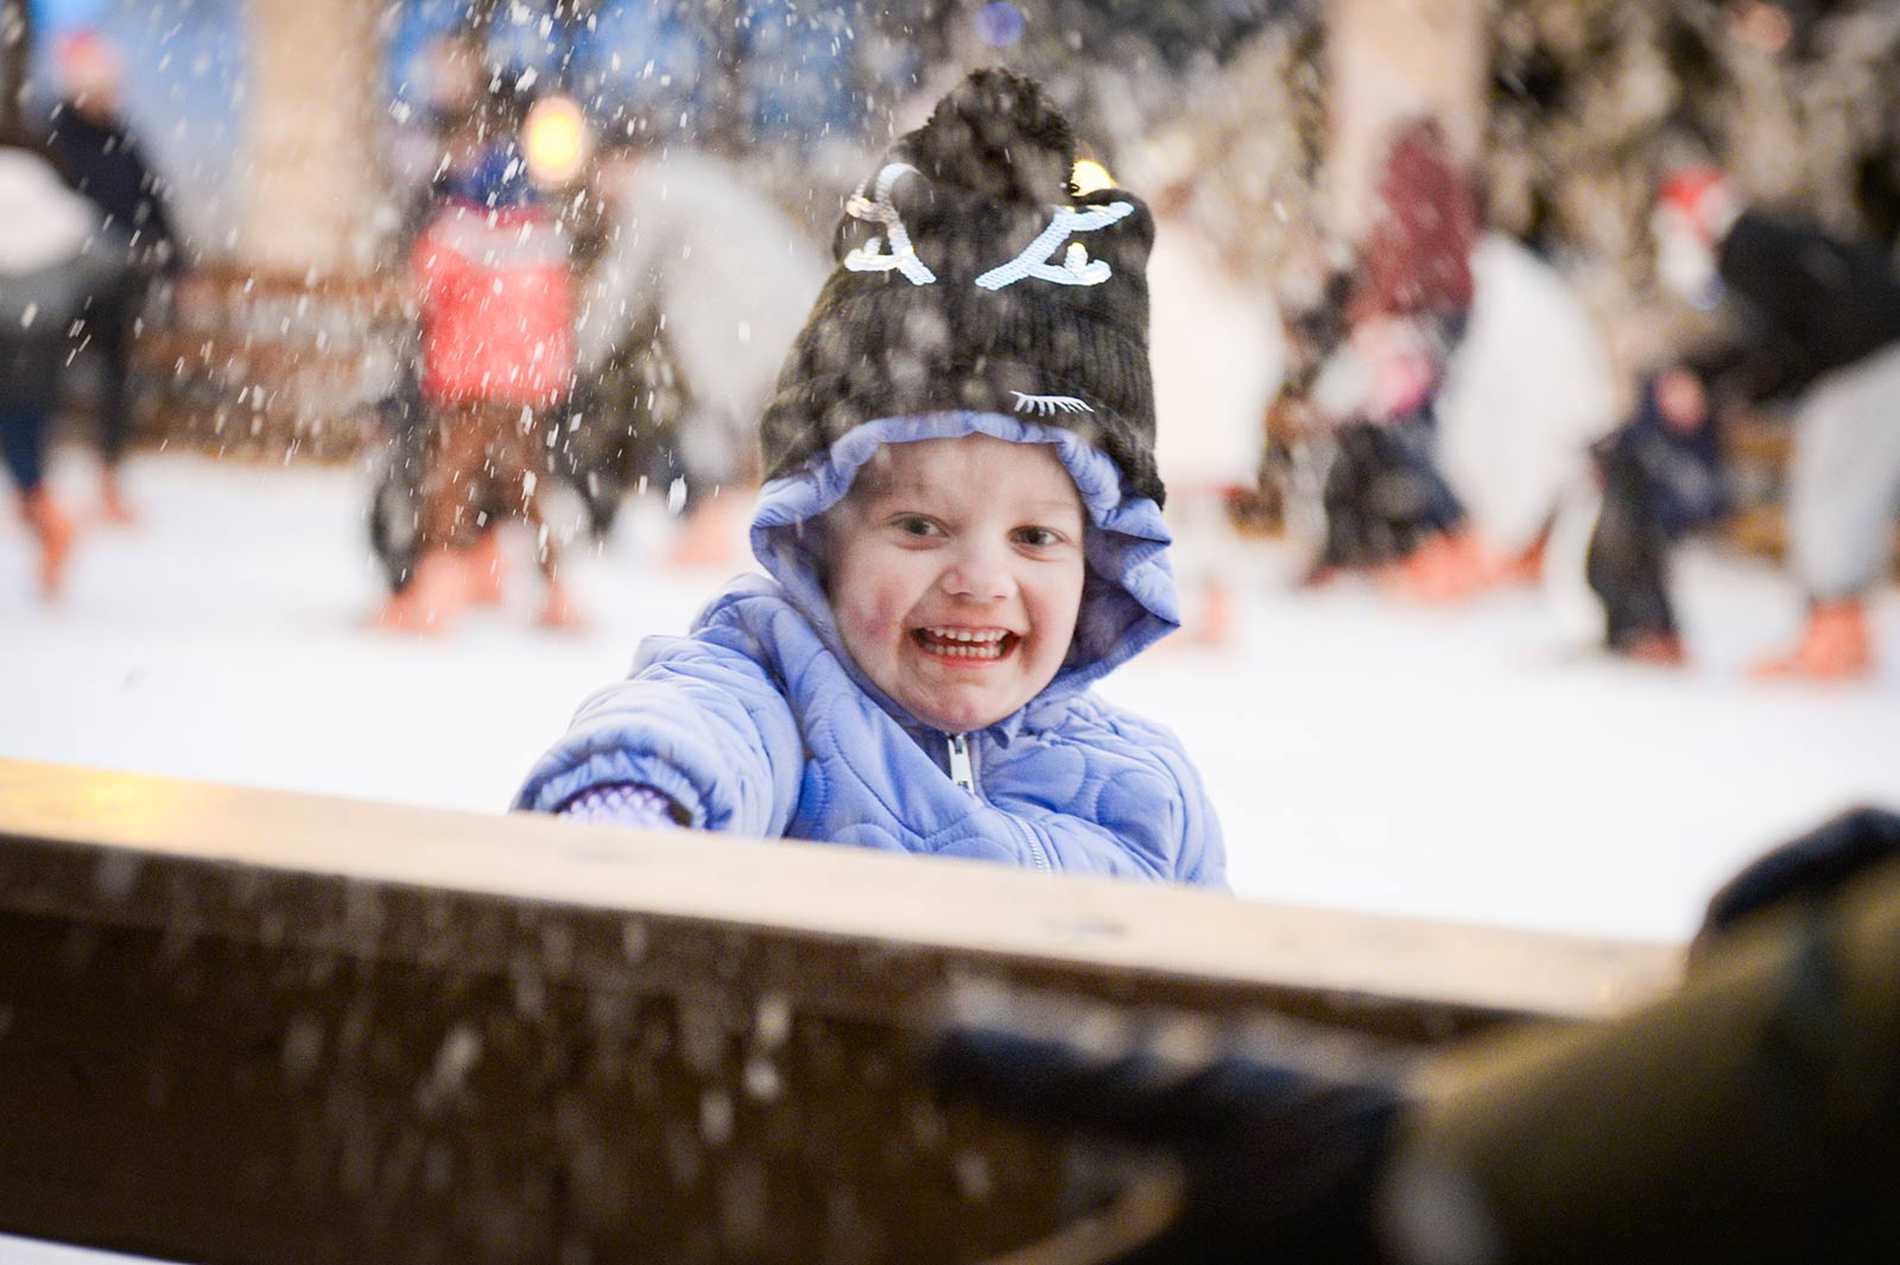 A close up of Julia standing by the edge of the ice rink throwing snow in the air with a huge smile on her face.